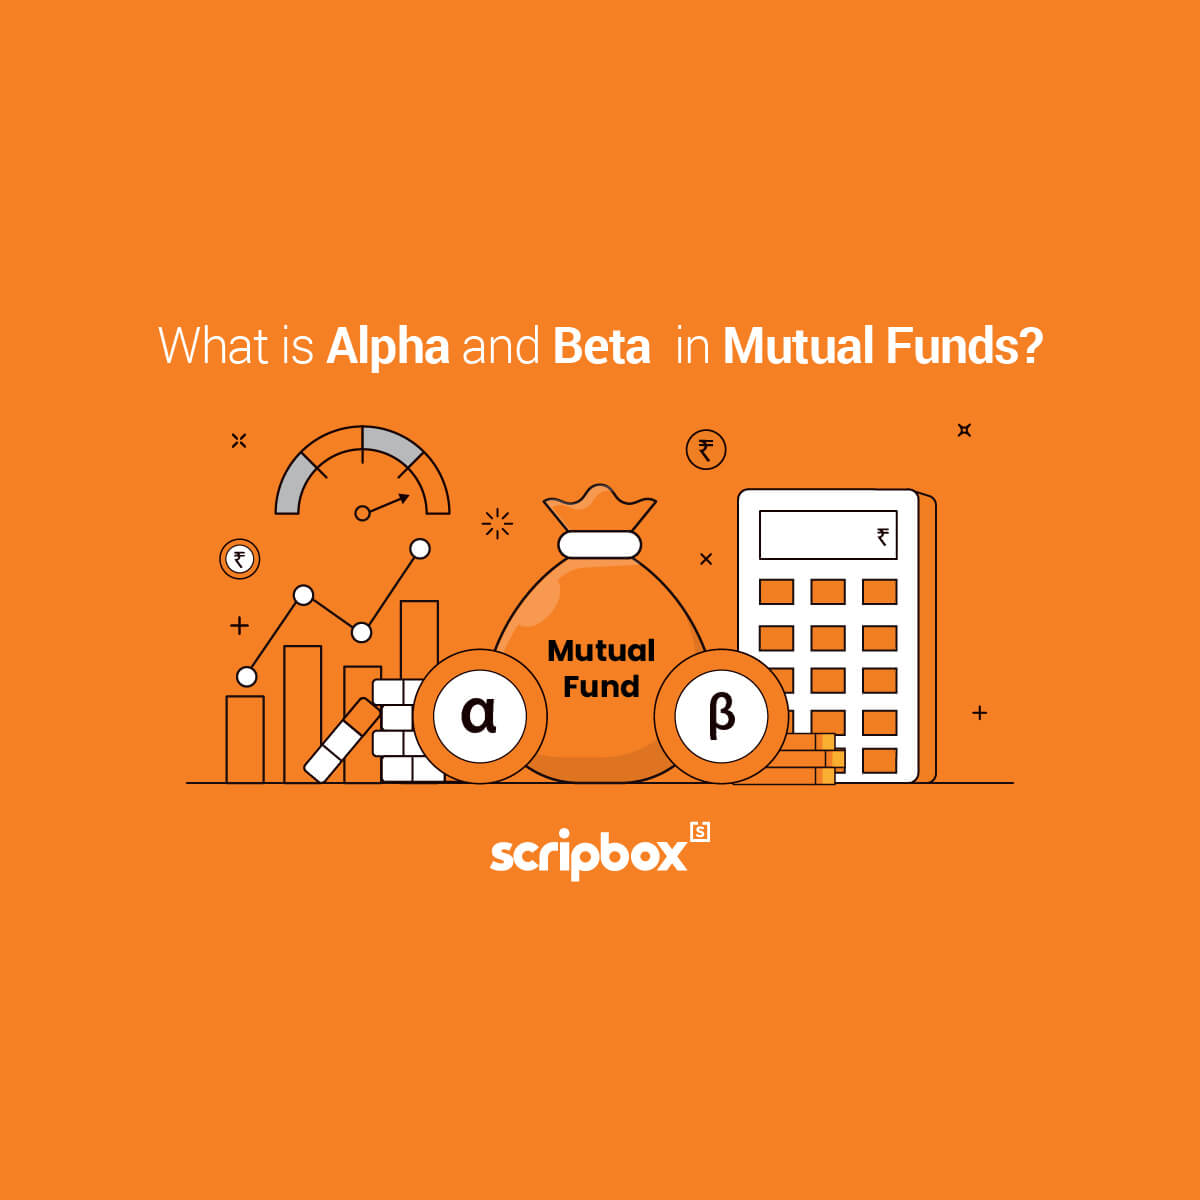 alpha and beta in mutual funds